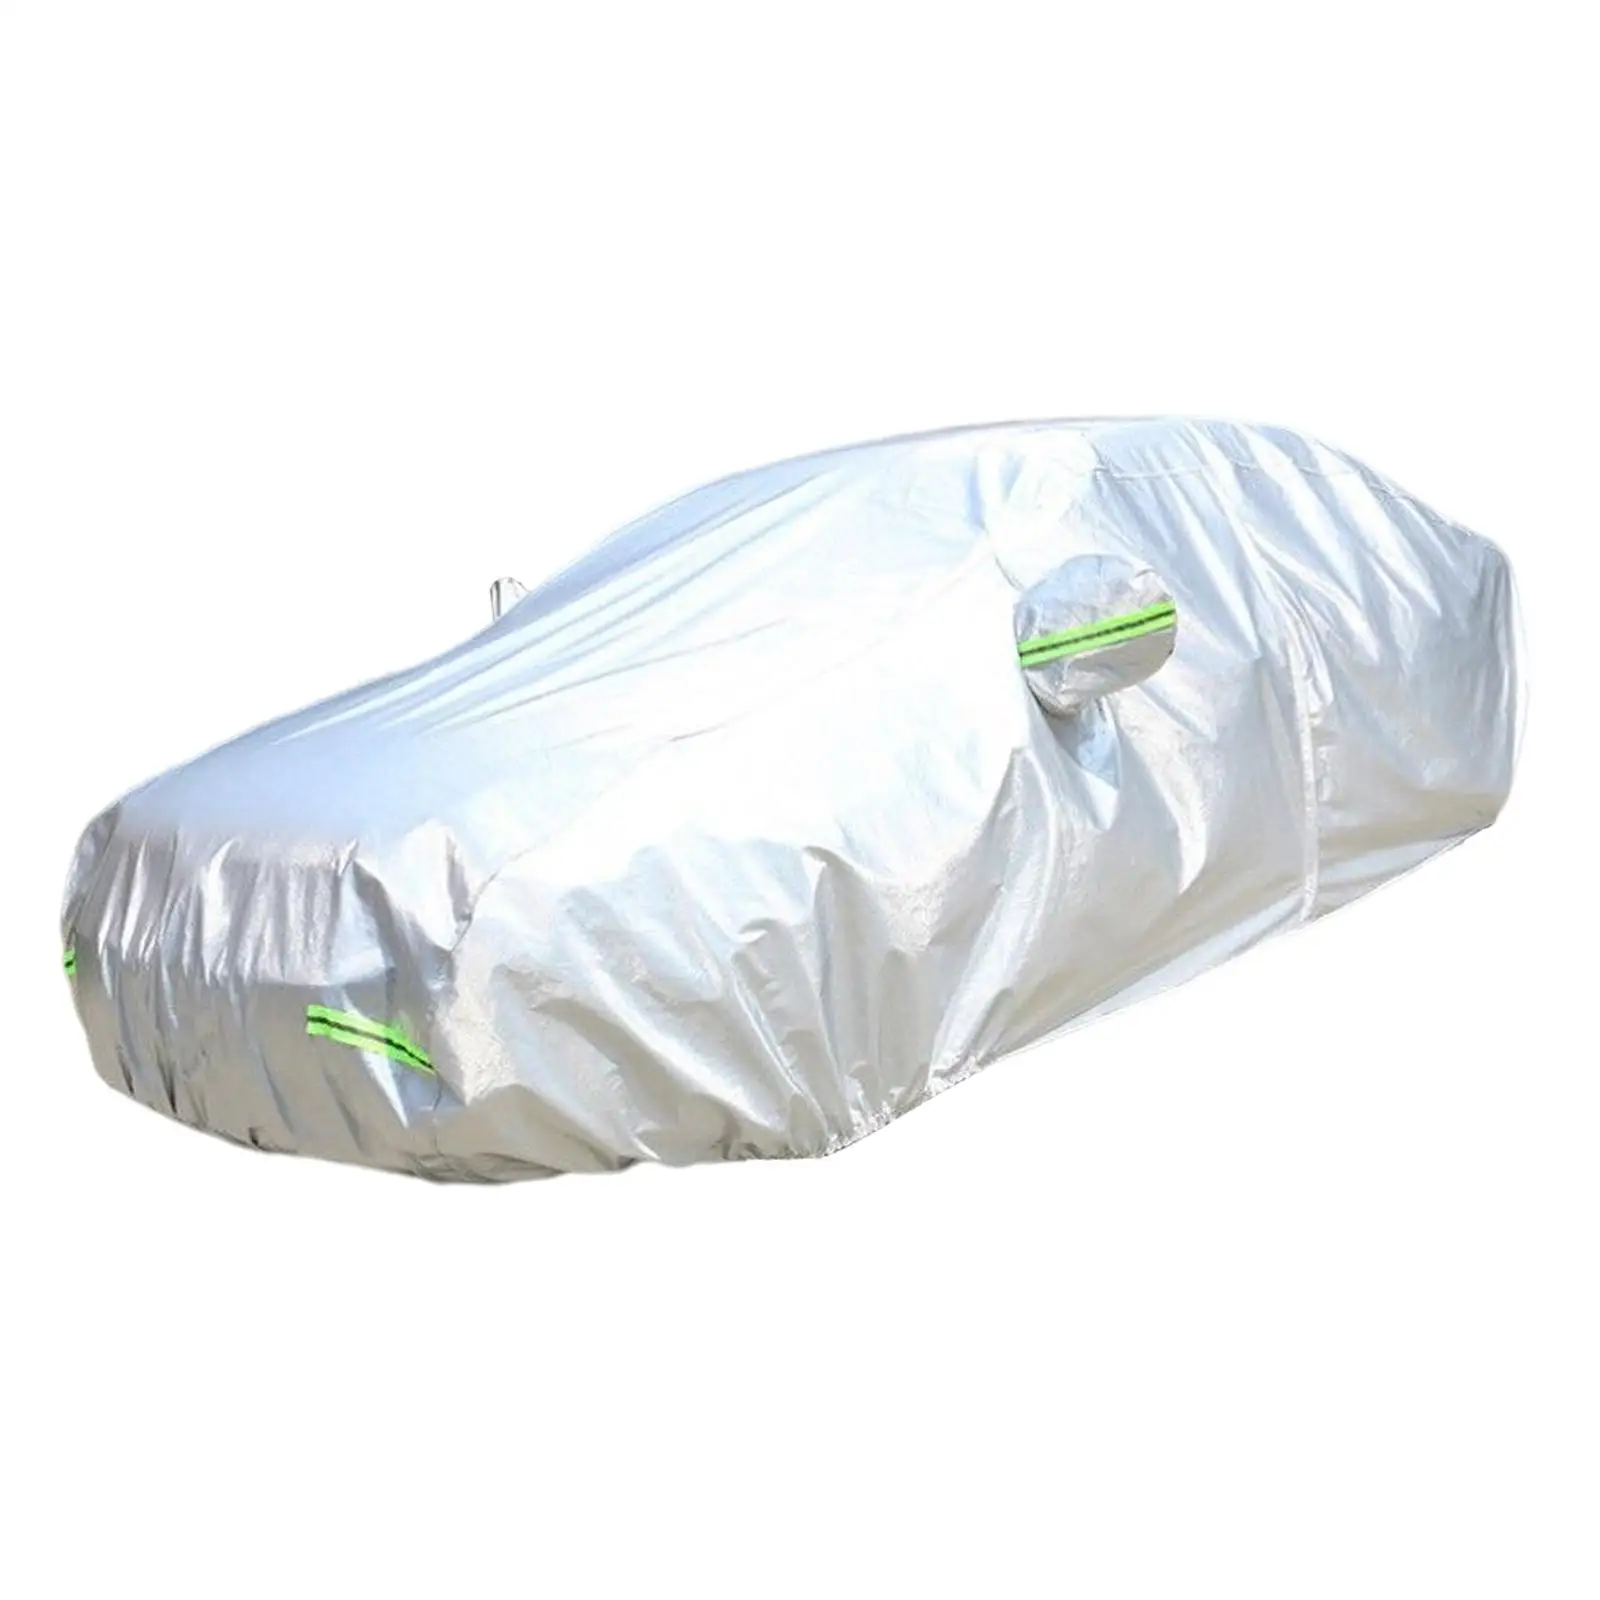 Thicken Oxford Cloth Car Cover Windproof for Byd Atto 3 Yuan Plus